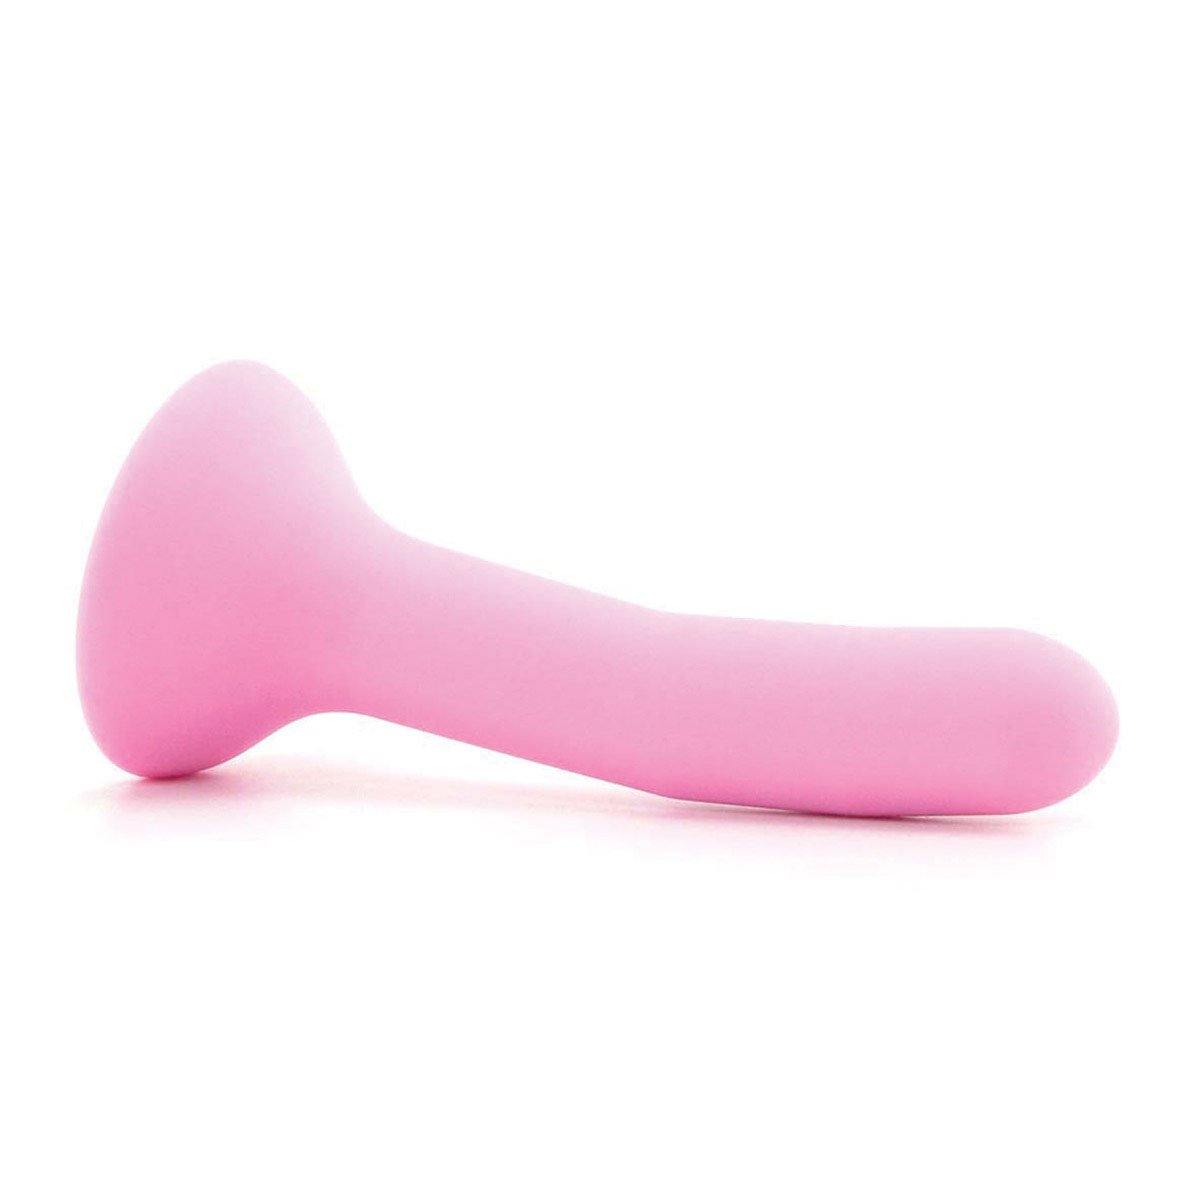 Wet for Her Five Jules - Small - Rose - Buy At Luxury Toy X - Free 3-Day Shipping